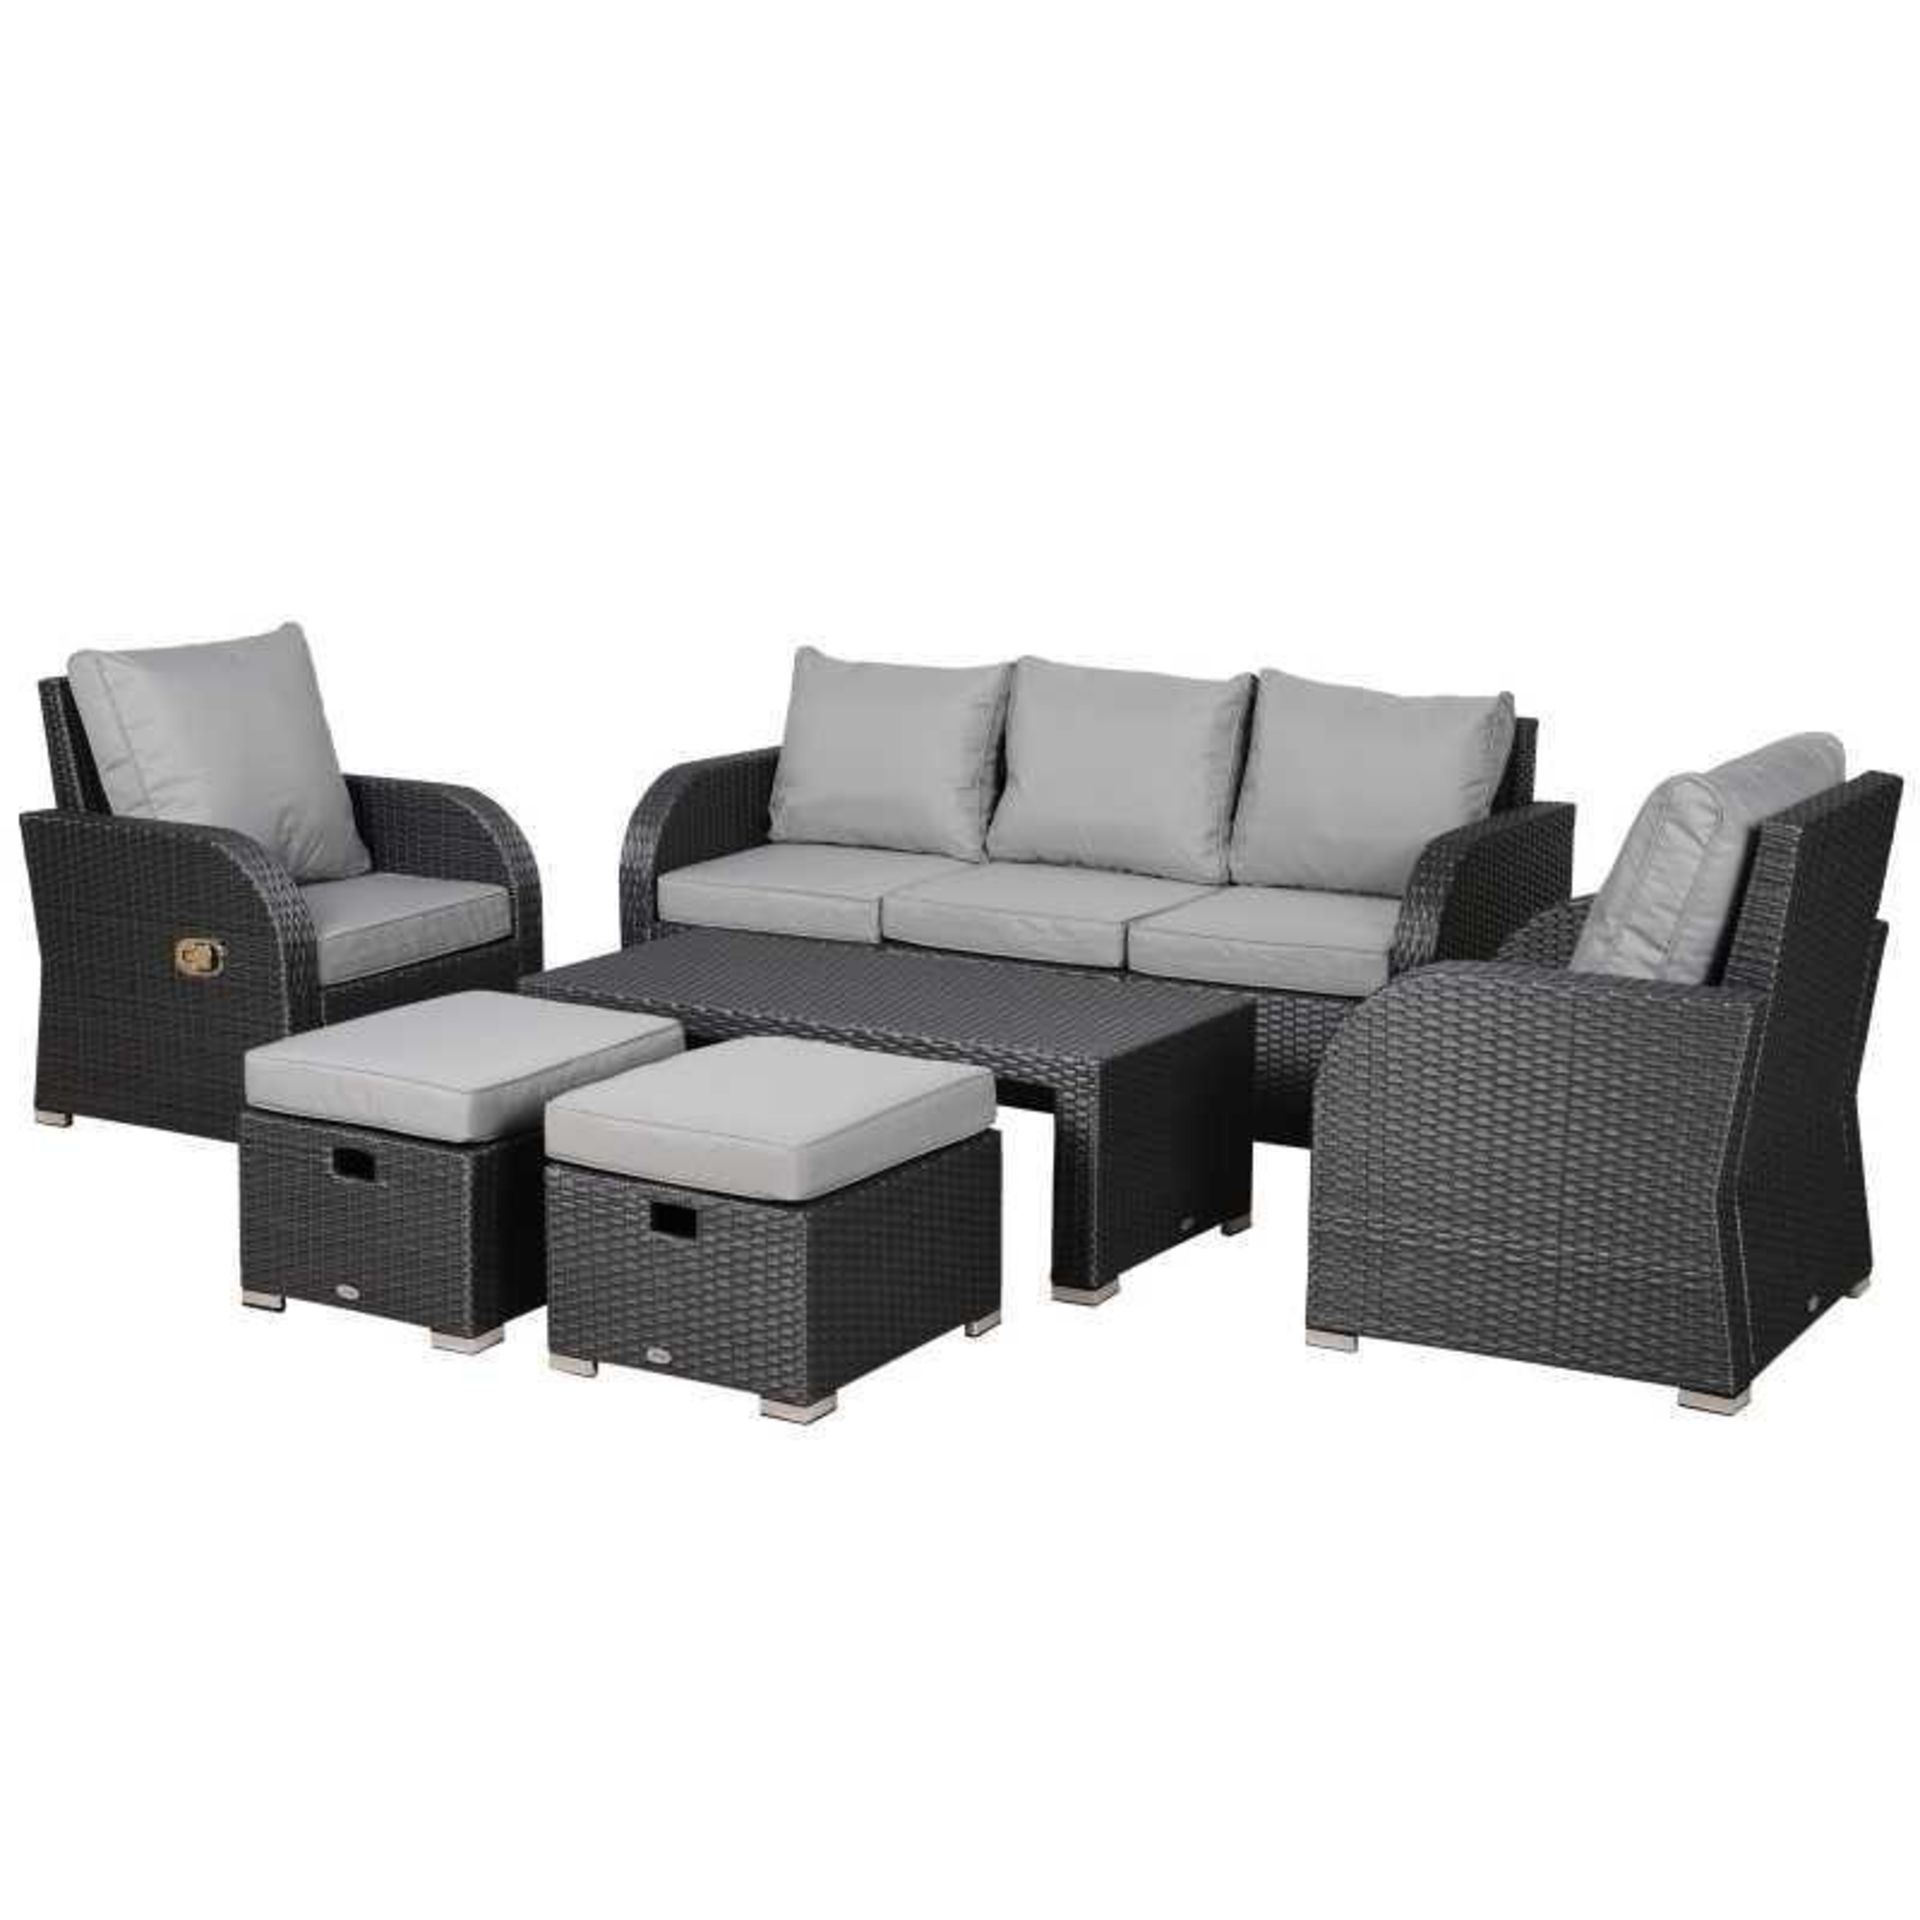 RRP £900 Lot To Contain X1 Boxed Outsunny 7-Seater Outdoor Garden Rattan Furniture Set W/ Recliners